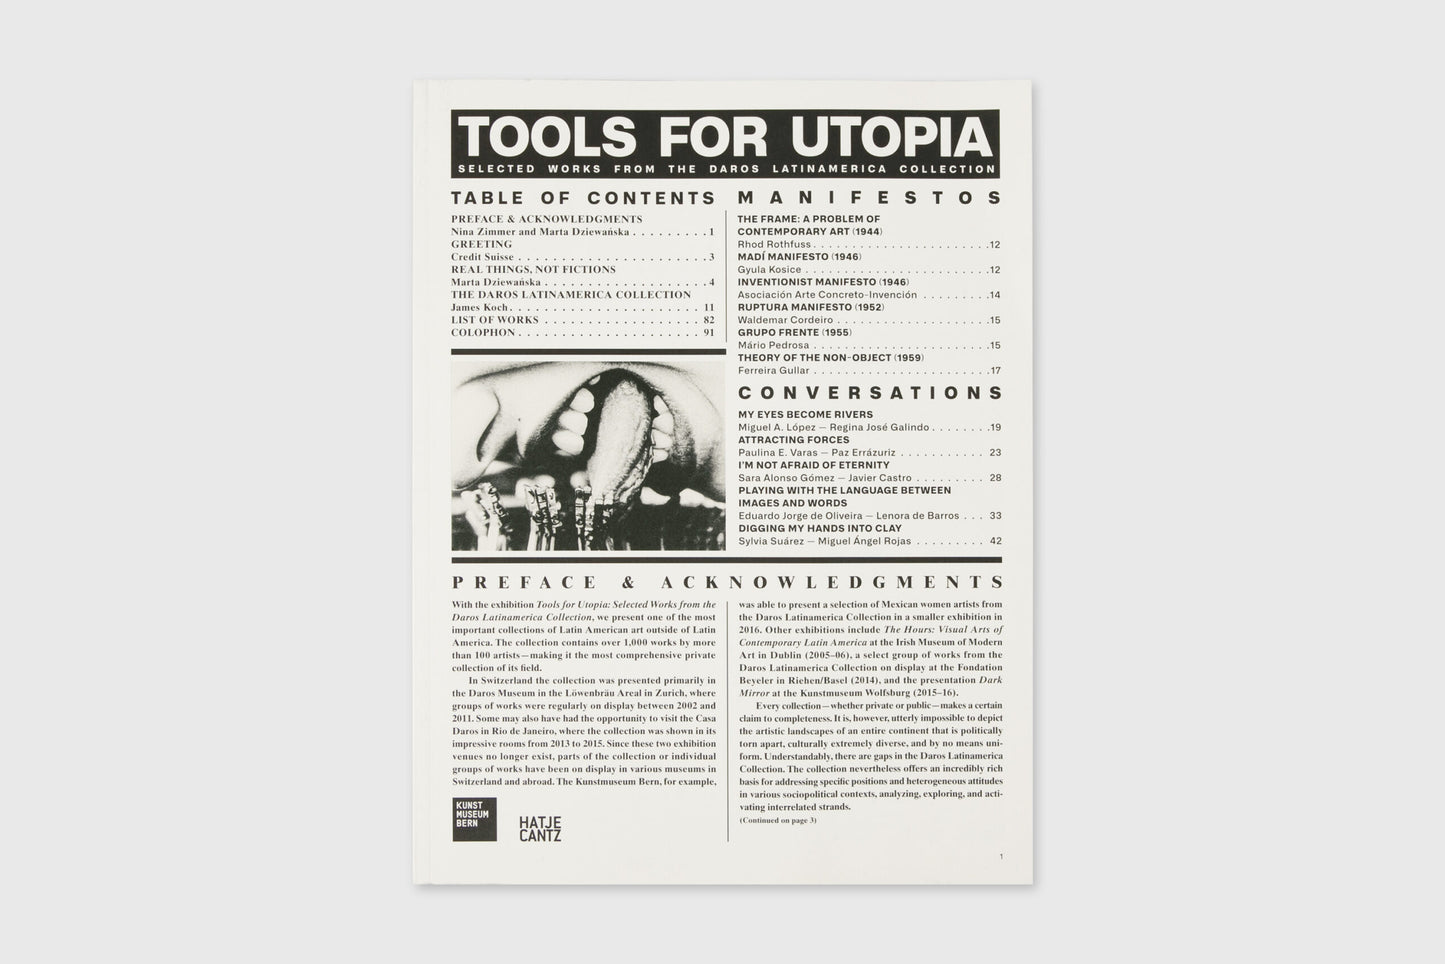 Tools for Utopia: Selected Works from the Daros Latinamerica Collection